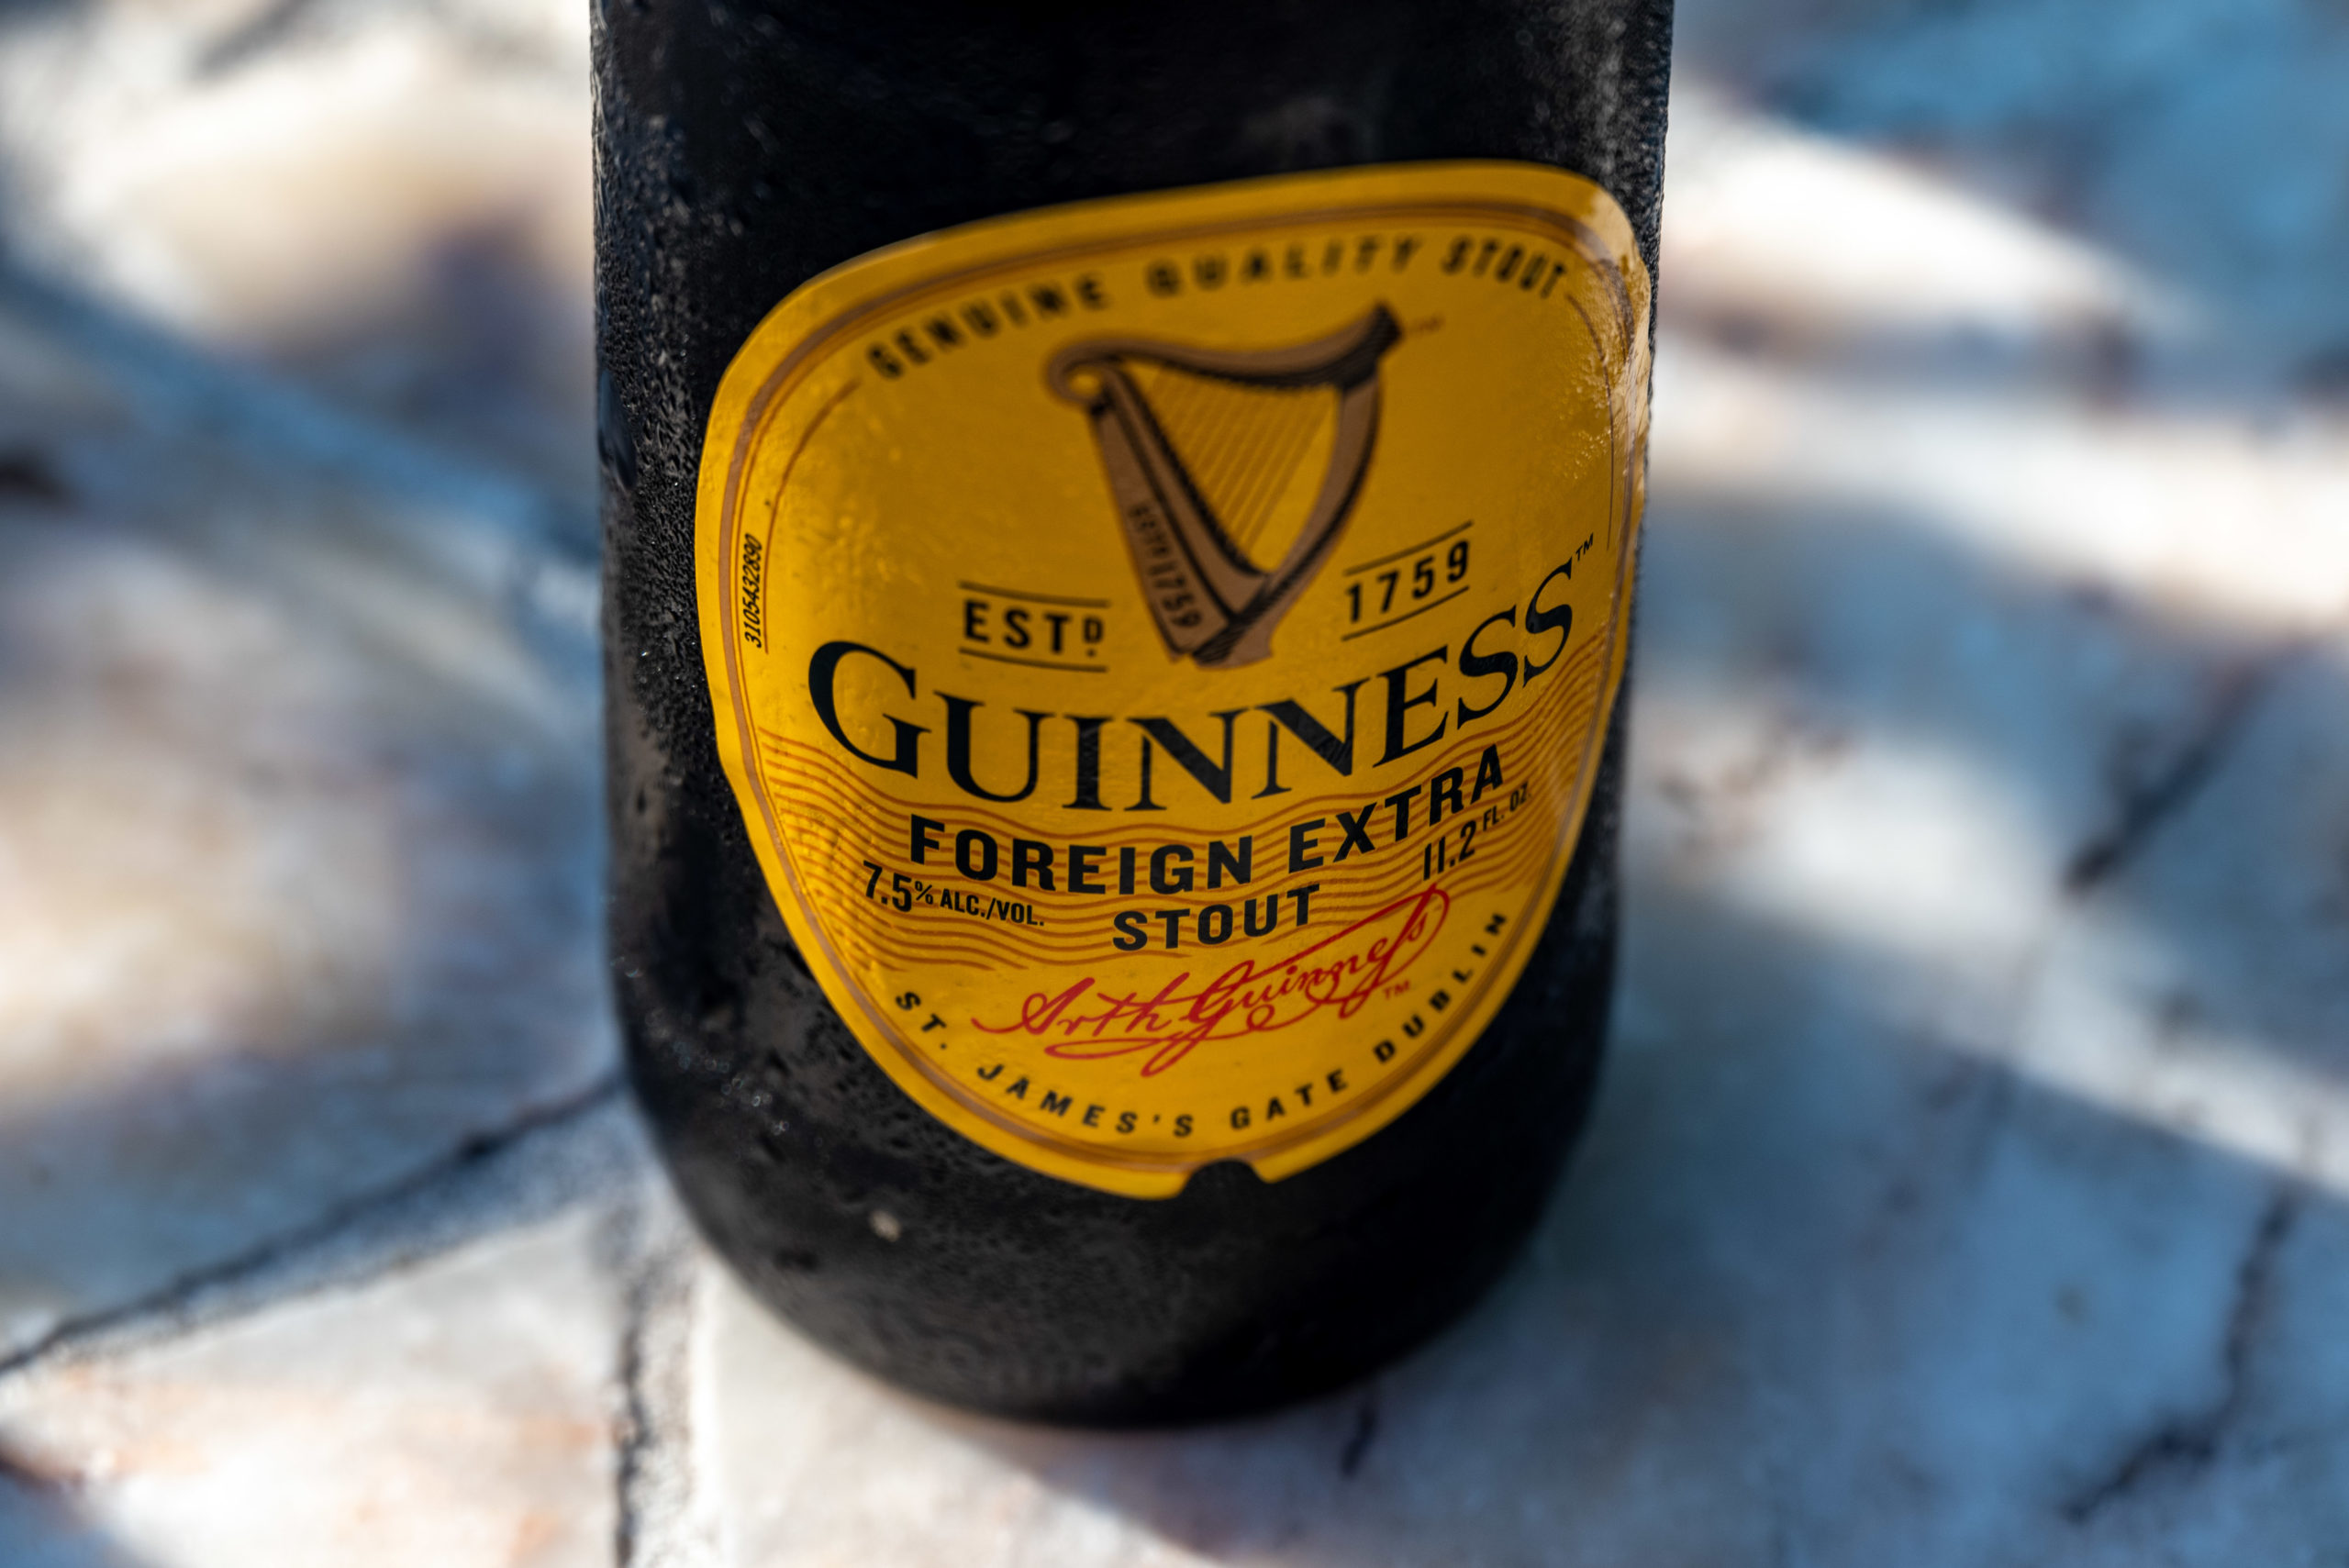 Guinness Foreign Extra Stout label